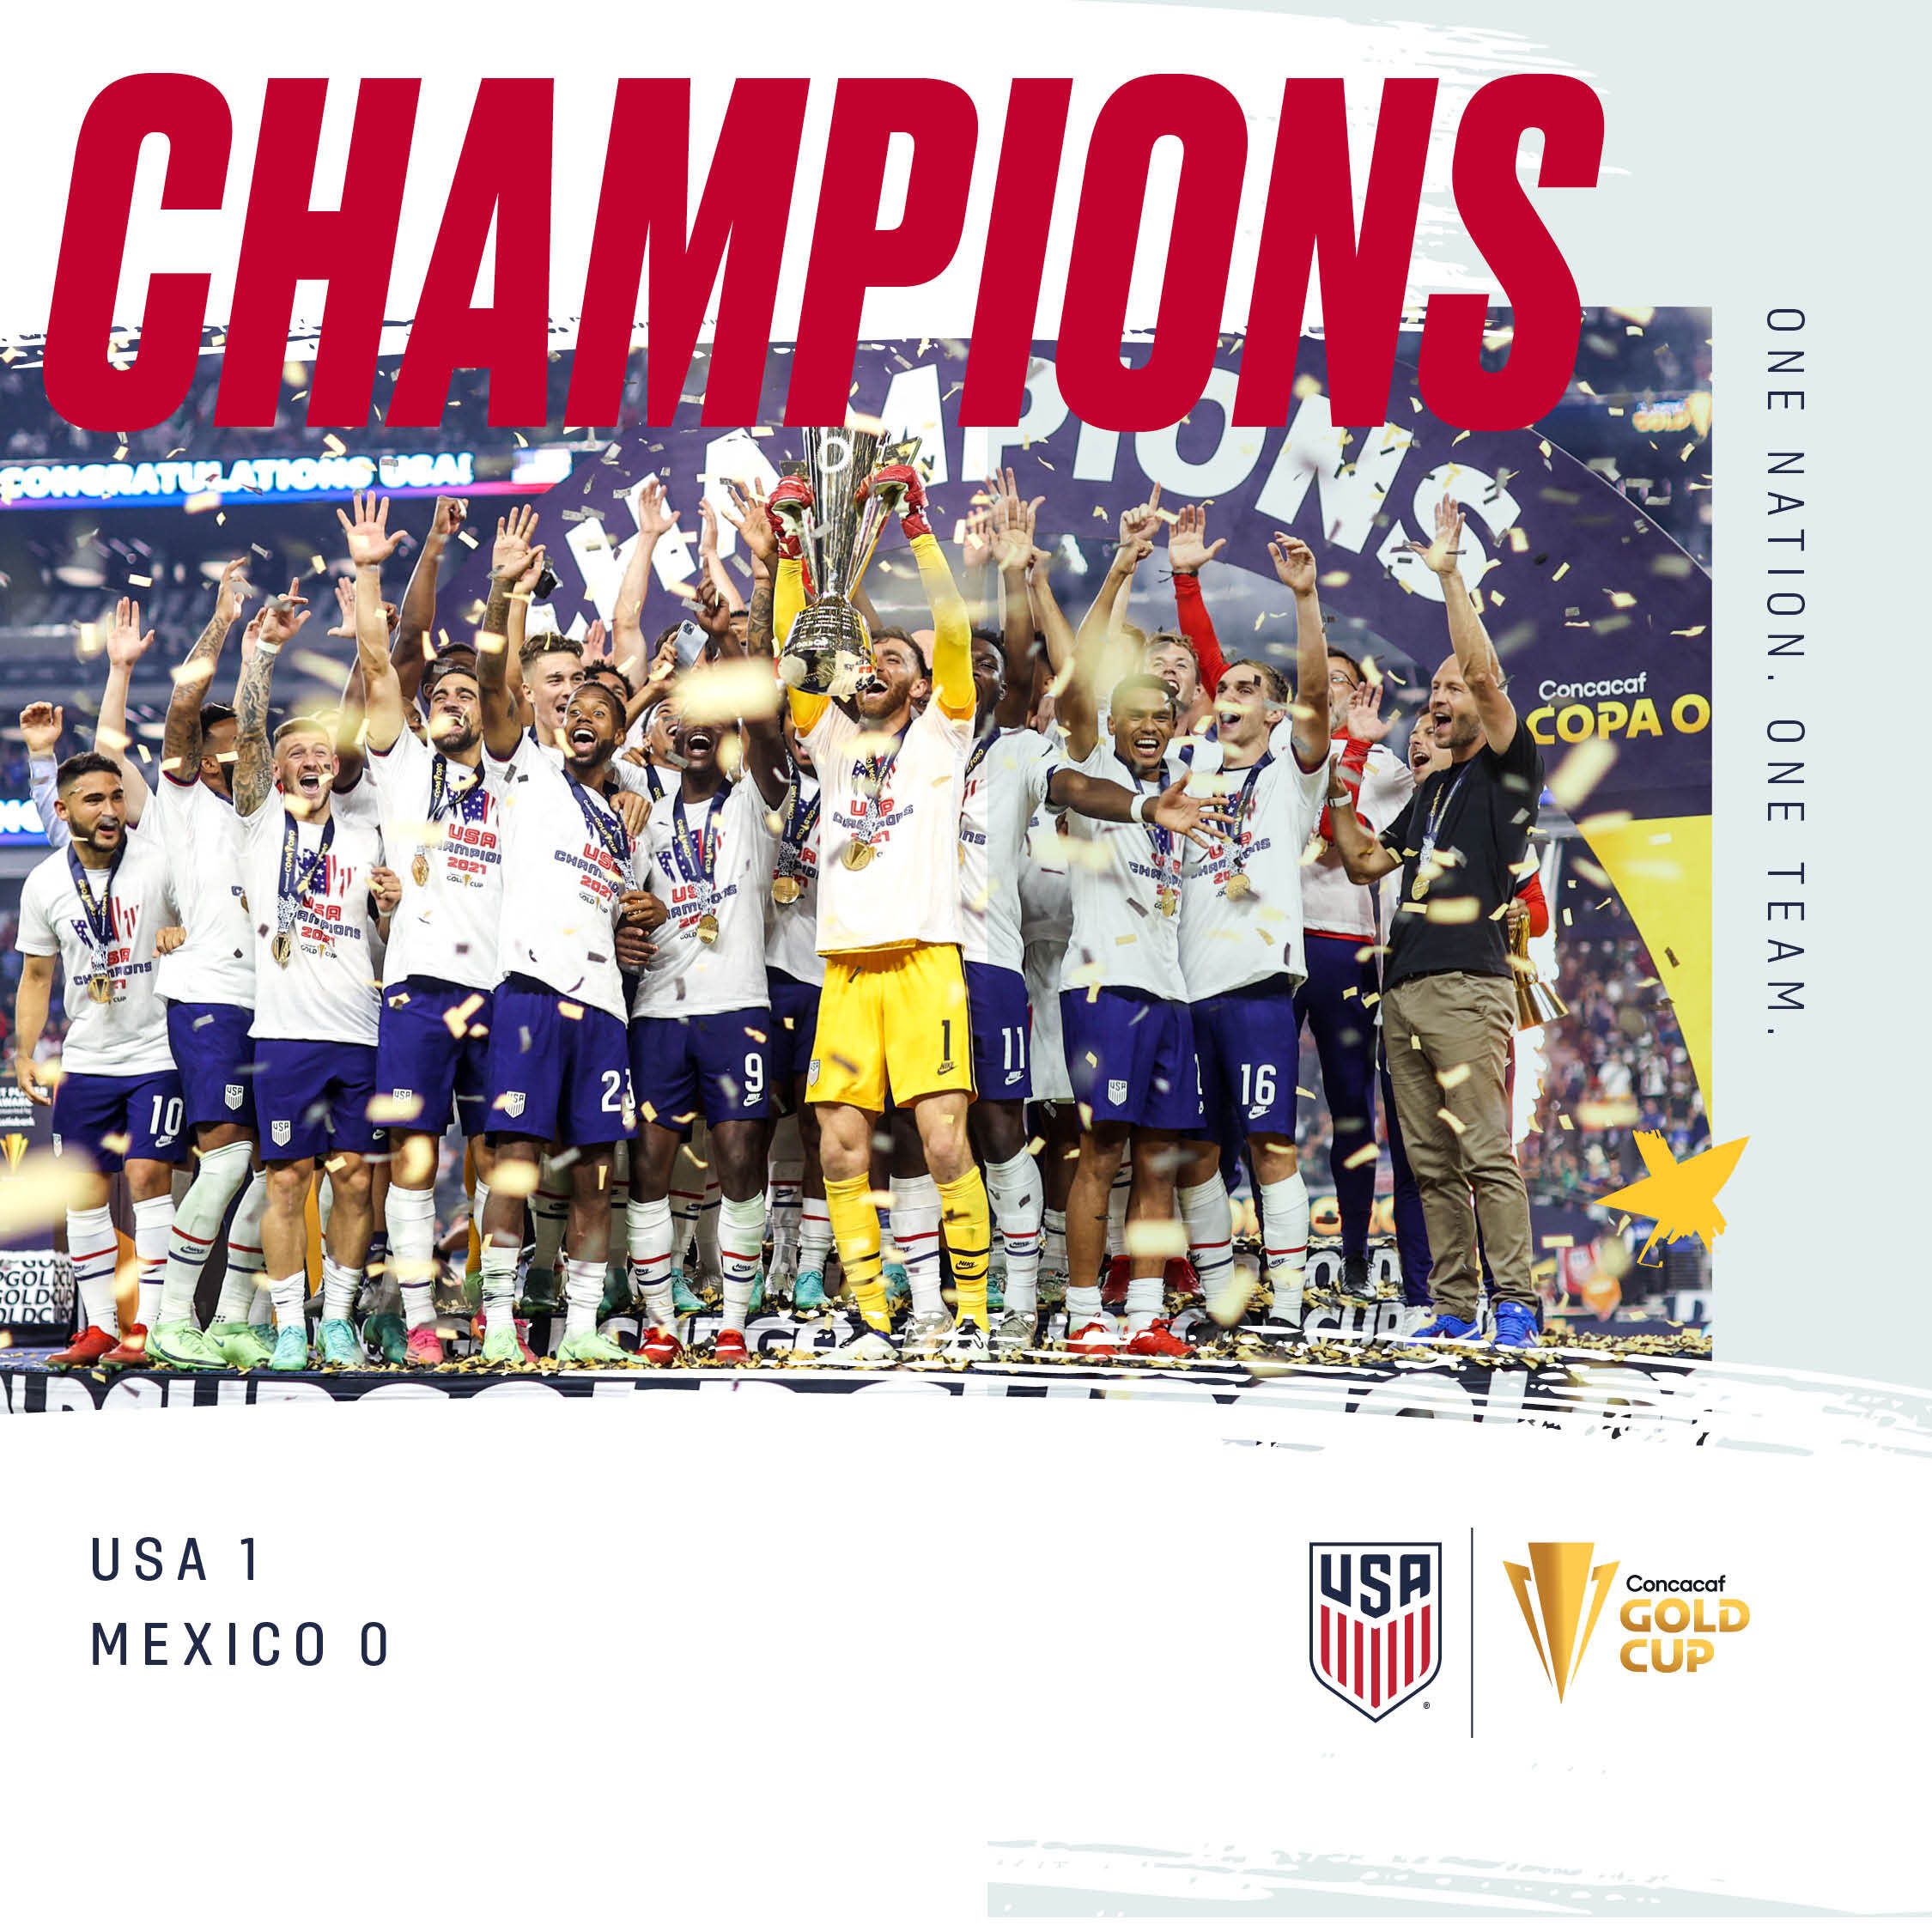 USA Wins 2021 Concacaf Gold Cup With Dramatic 1-0 Extra-time Victory Against Mexico